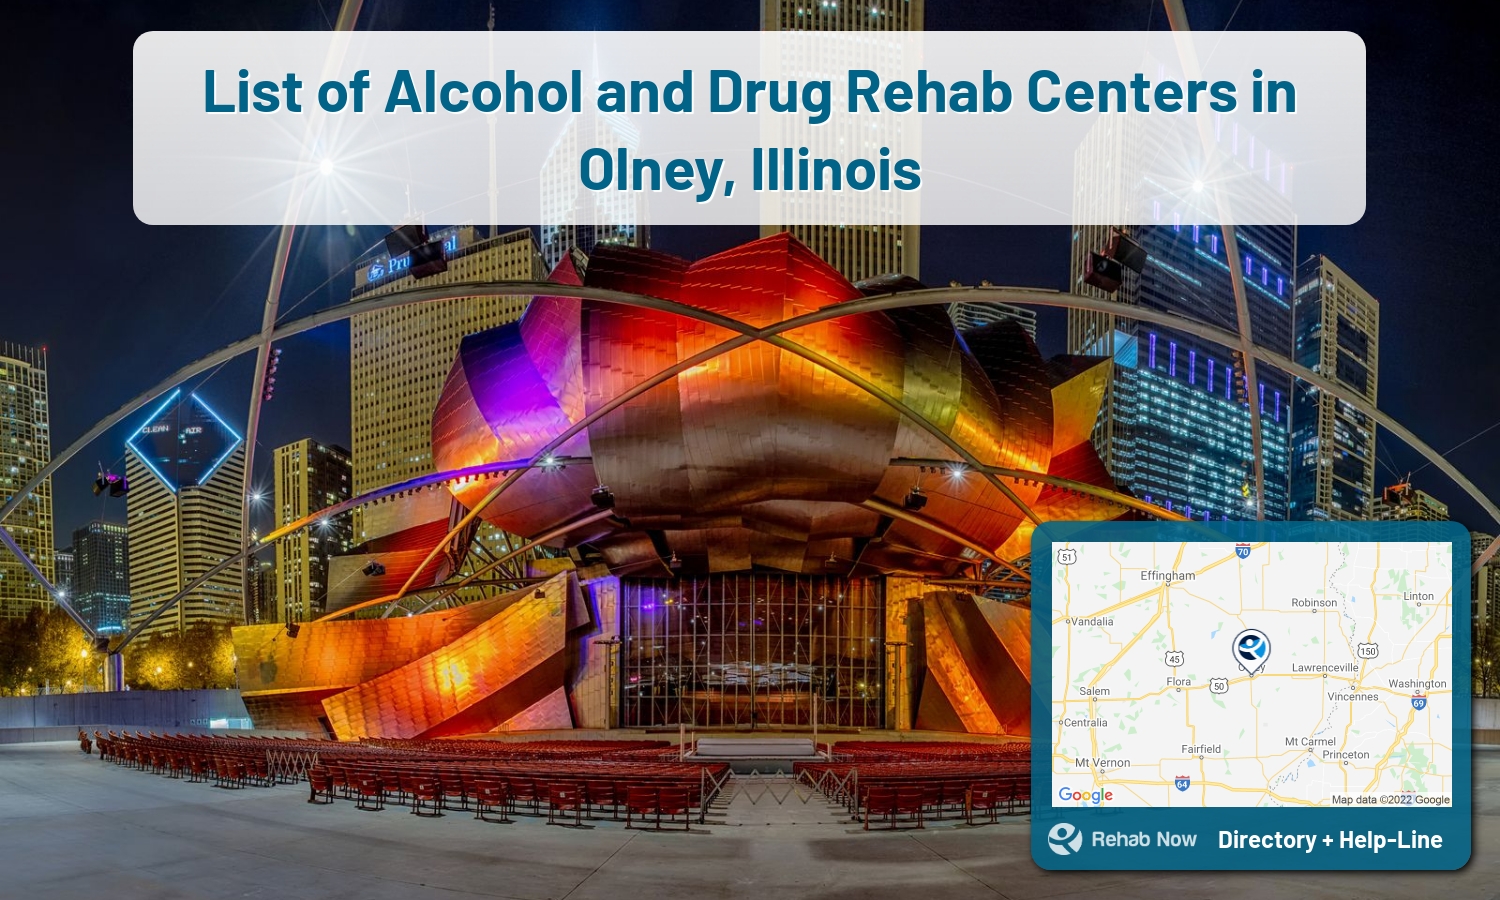 Let our expert counselors help find the best addiction treatment in Olney, Illinois now with a free call to our hotline.